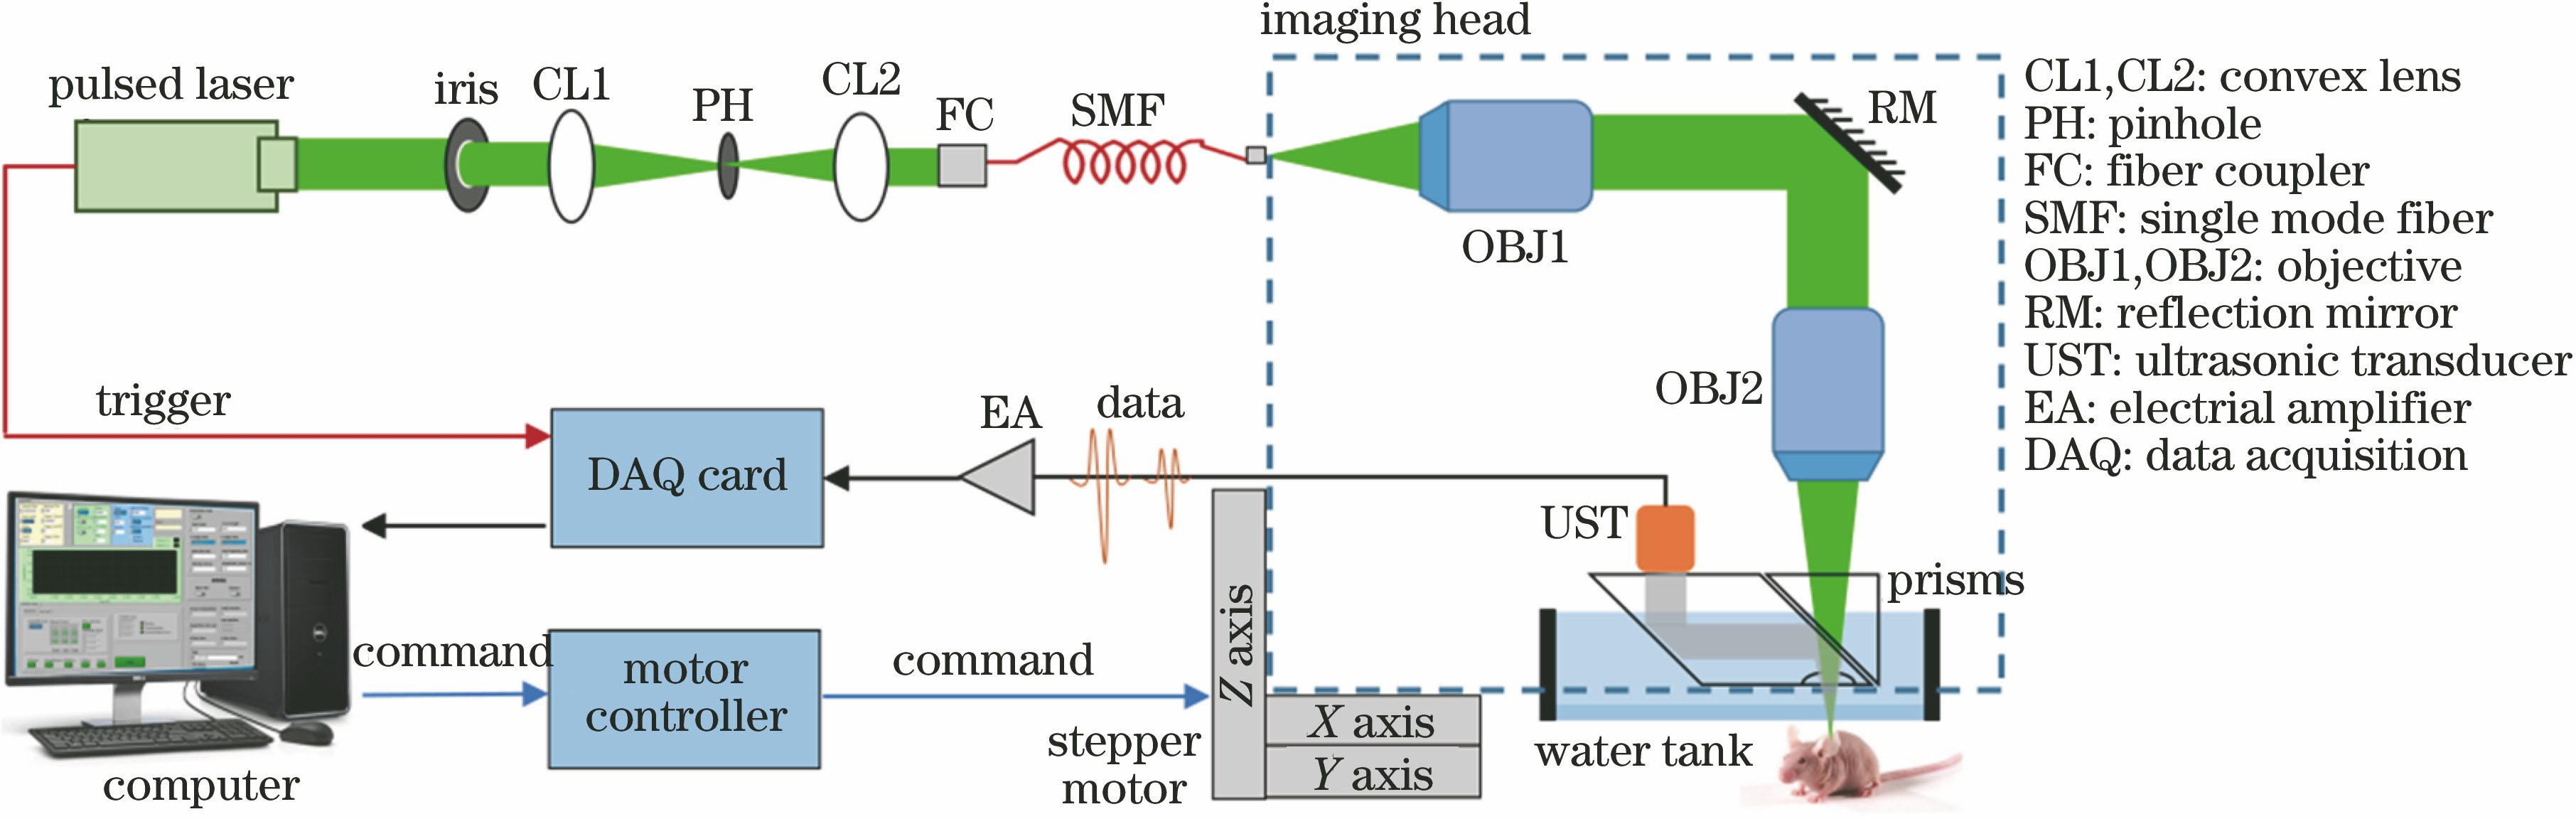 Schematic of high-resolution photoacoustic microscopy imaging system